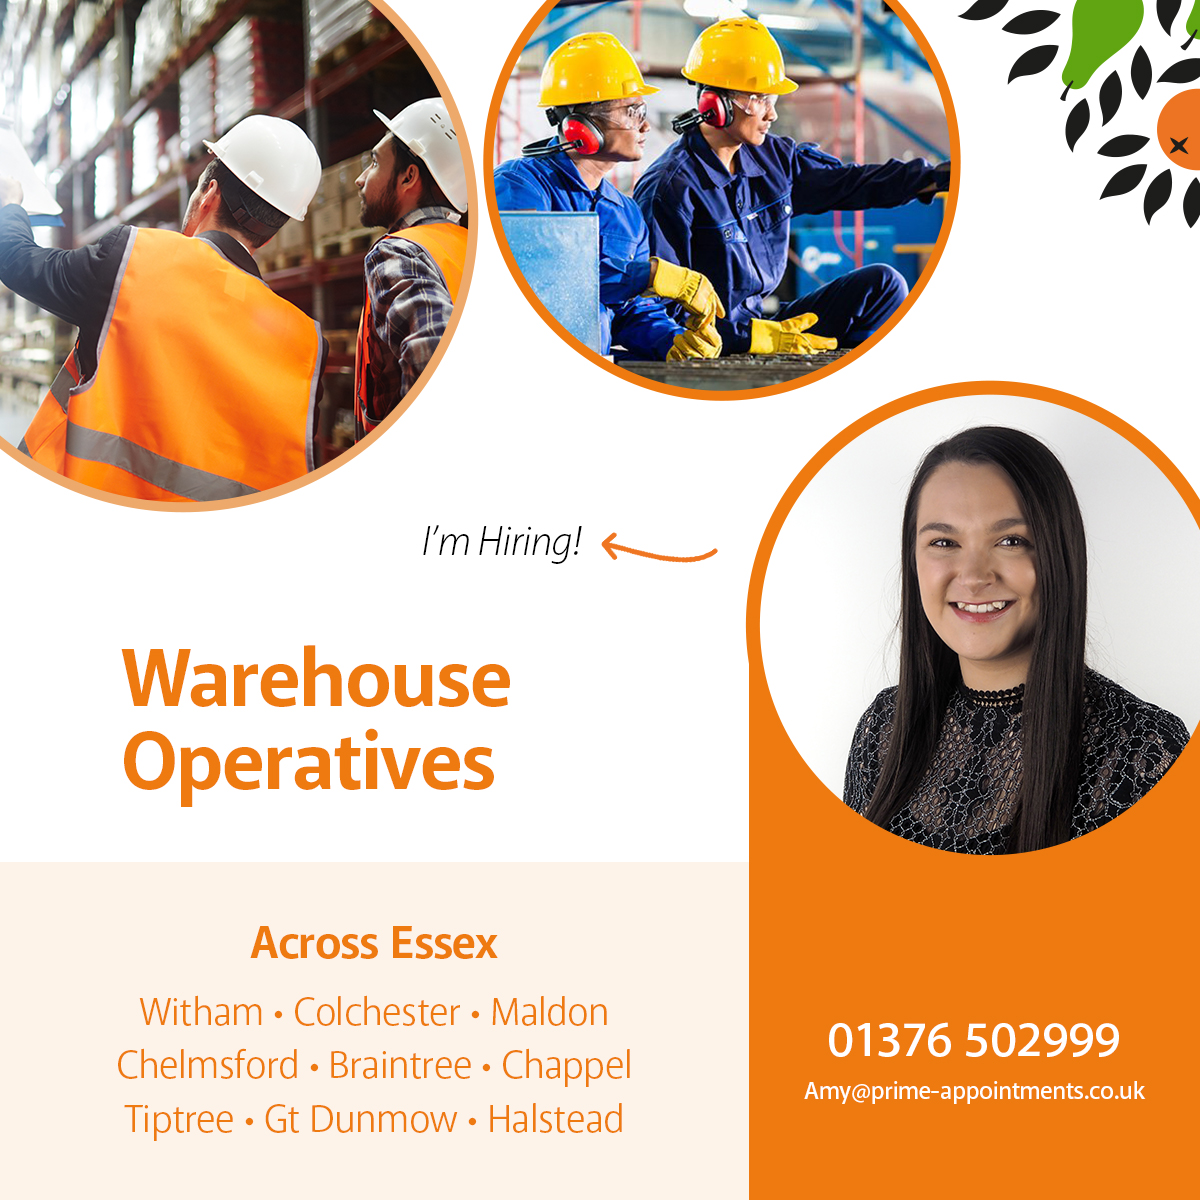 We're hiring Warehouse Operatives!

If you're physically fit and able and fancy a hands-on manual job then take a look at the current Warehouse Operative roles here: bit.ly/3zBBBZ3 Or call Amy on 01376 502999 to find out more.

#RecruitmentAgency #WarehouseOperatives